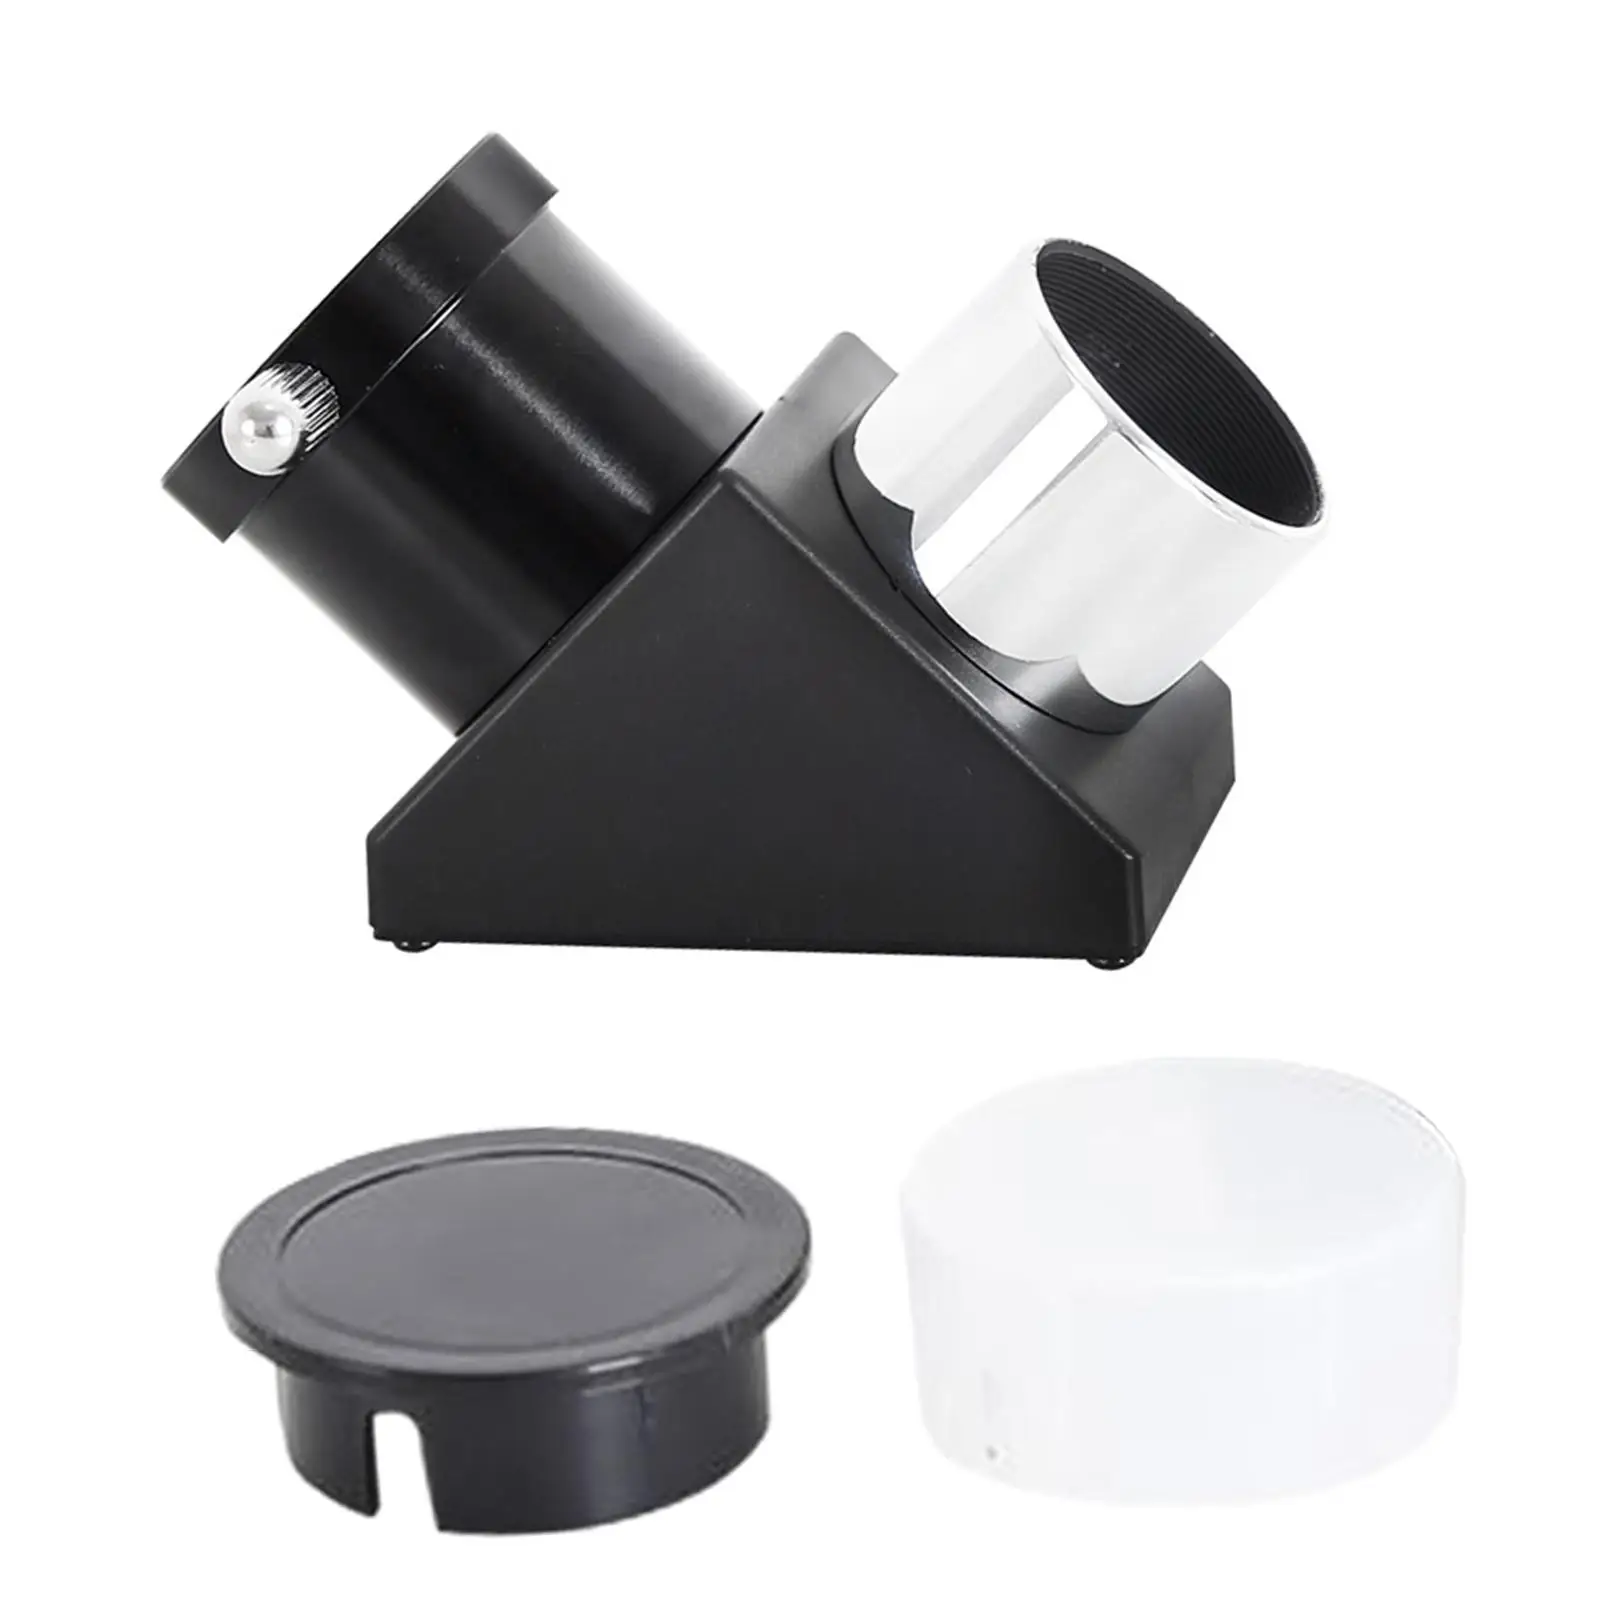 90 Degree Diagonal Mirror Metal Astronomical Telescope Accessories for Astronomical Visual Astrophotography Simple to Install